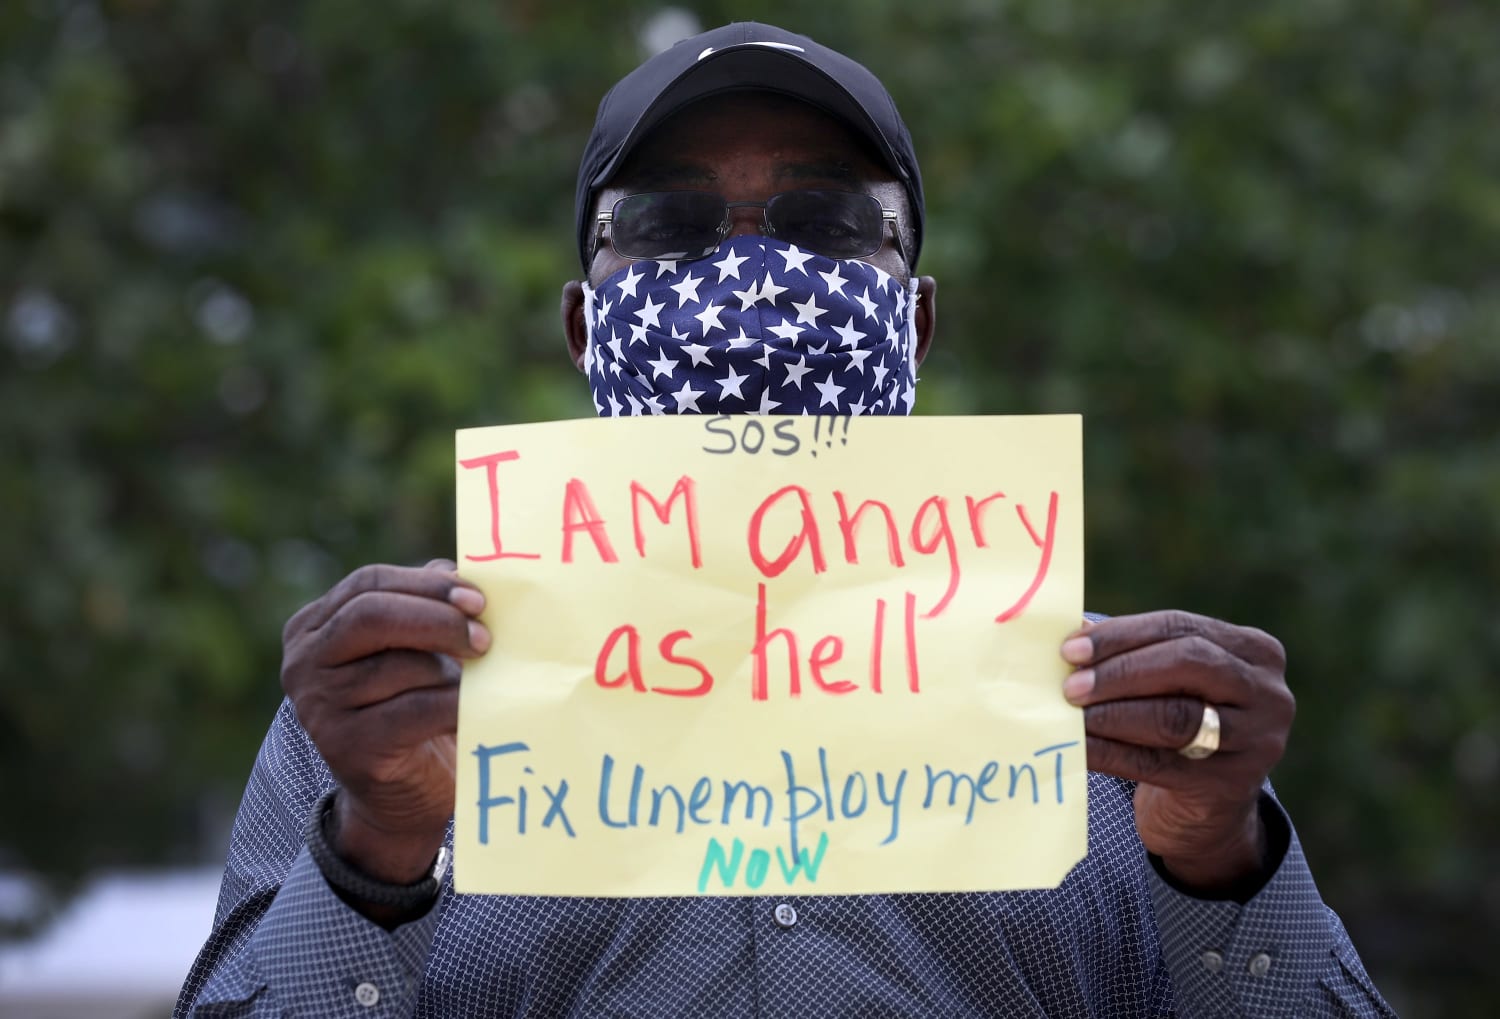 As new data shows early signs of economic recovery, black workers are being left out